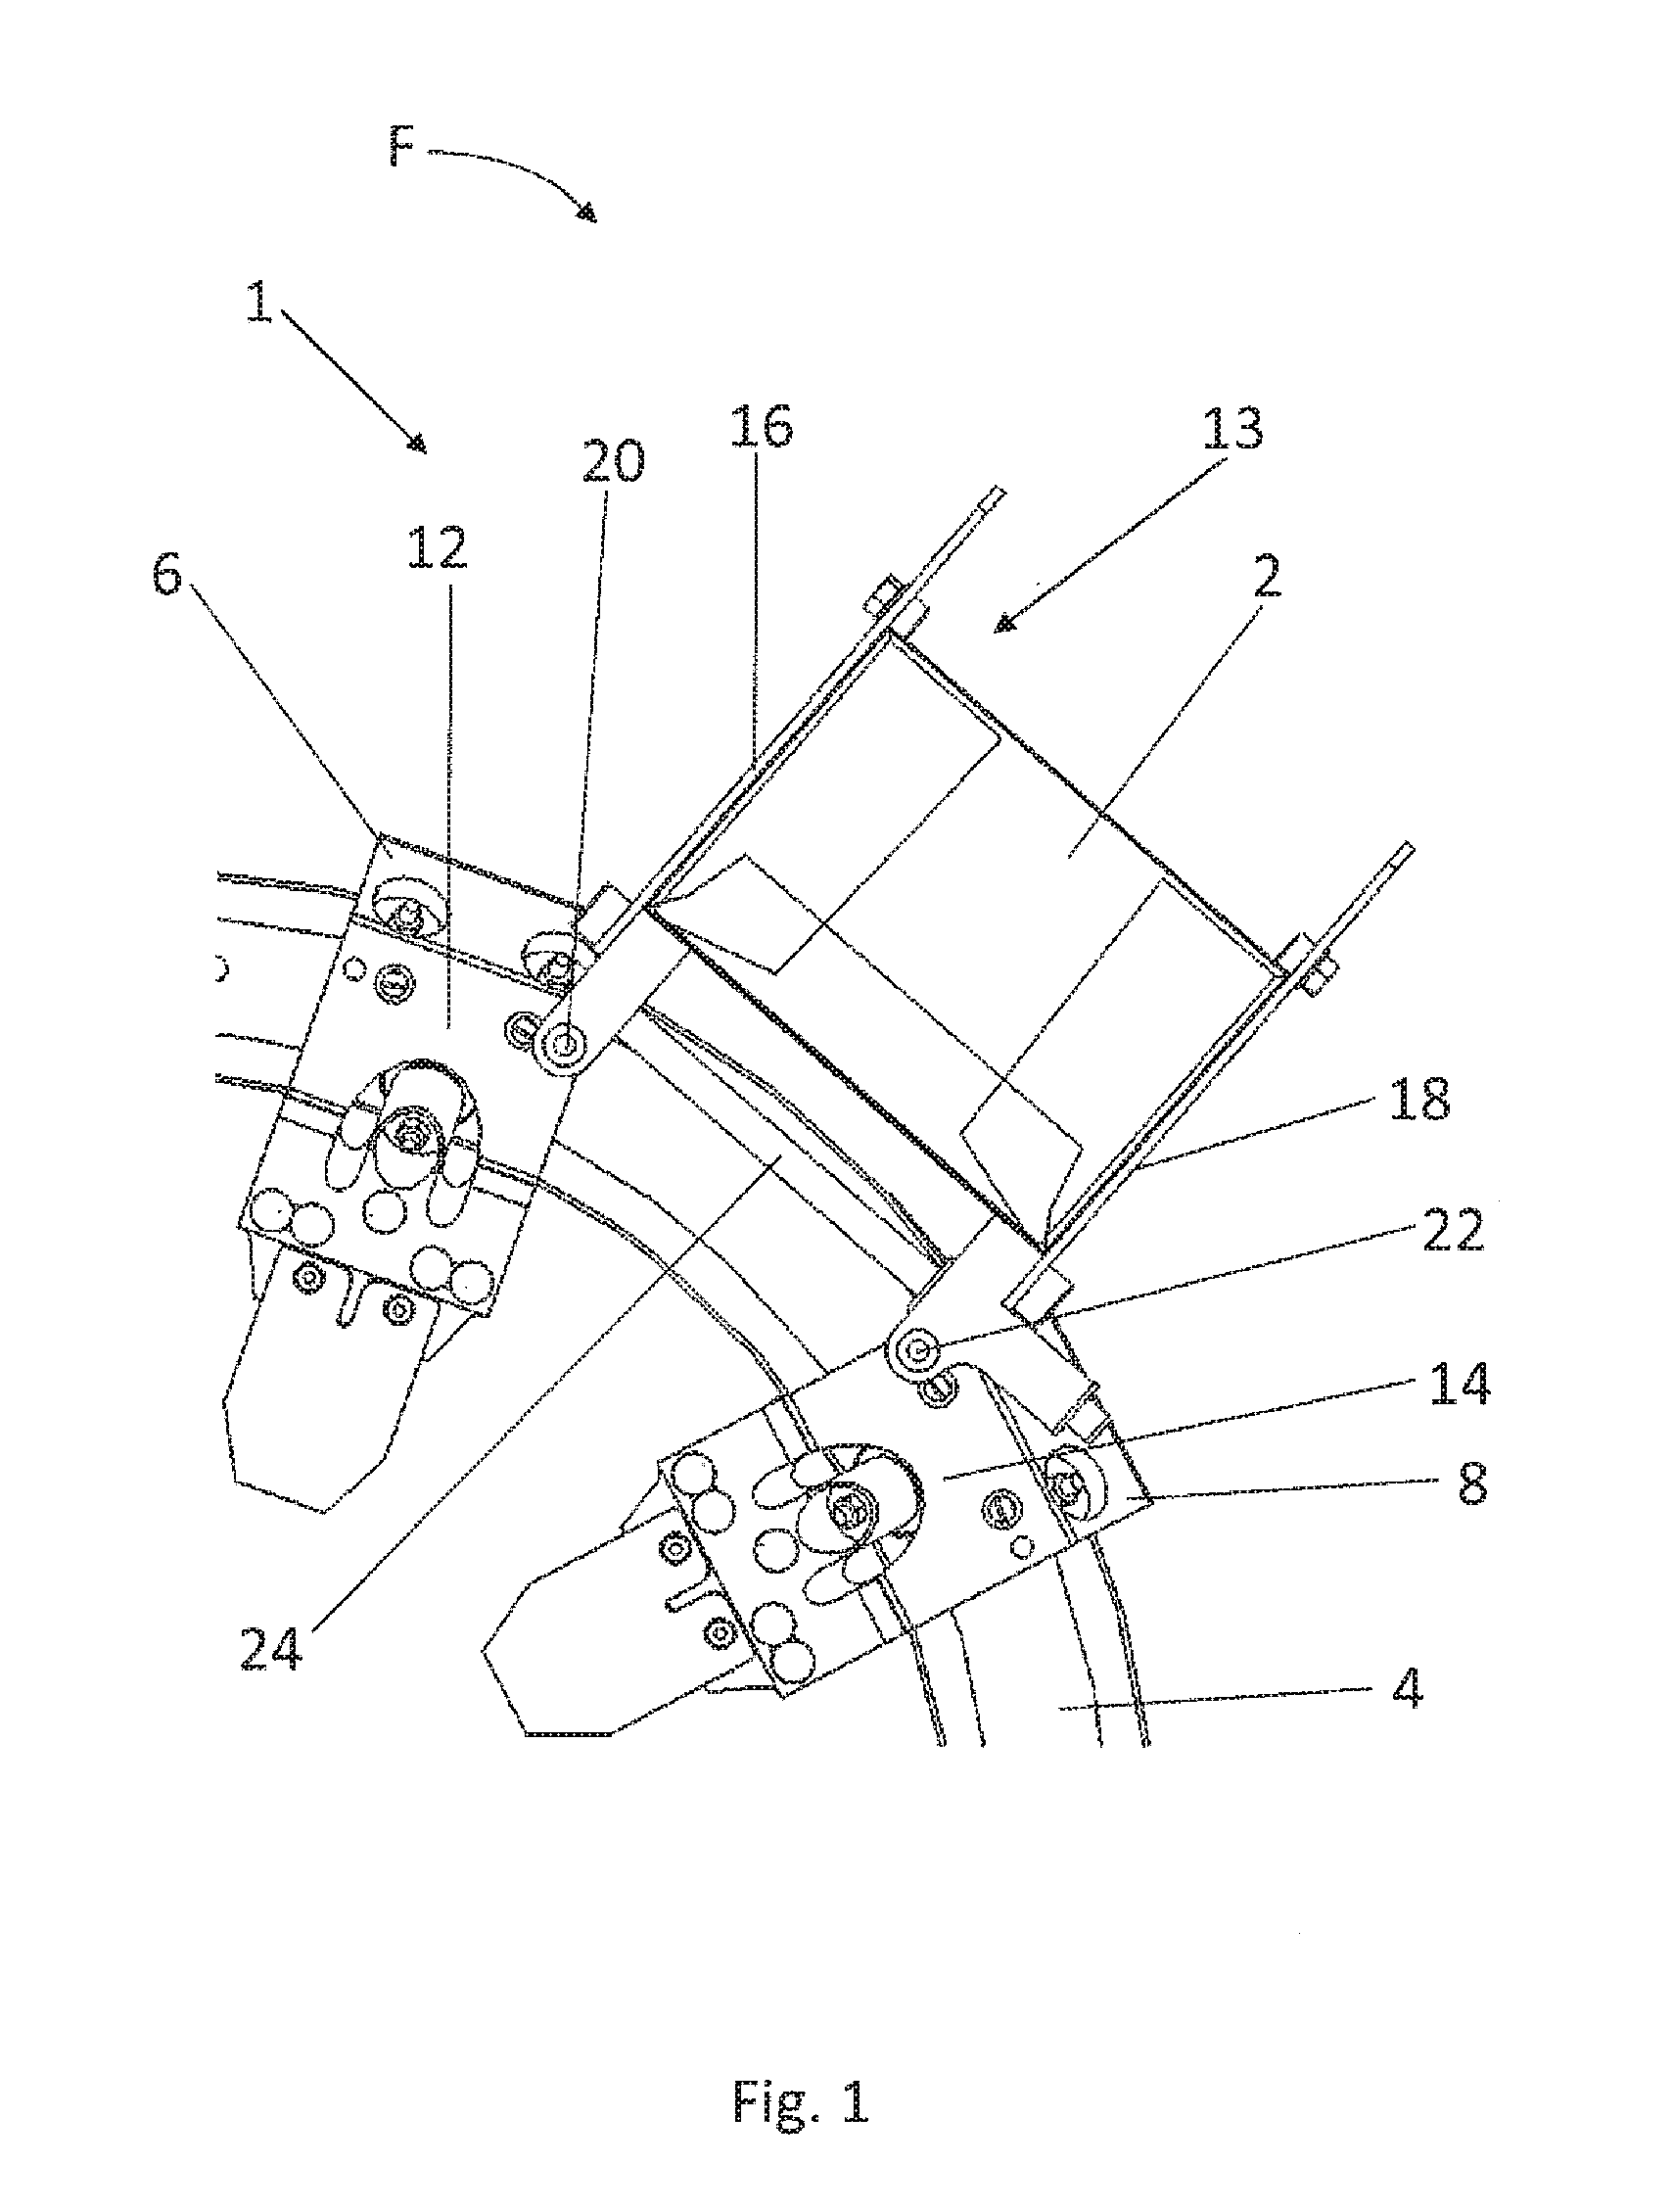 Transport device for conveying products